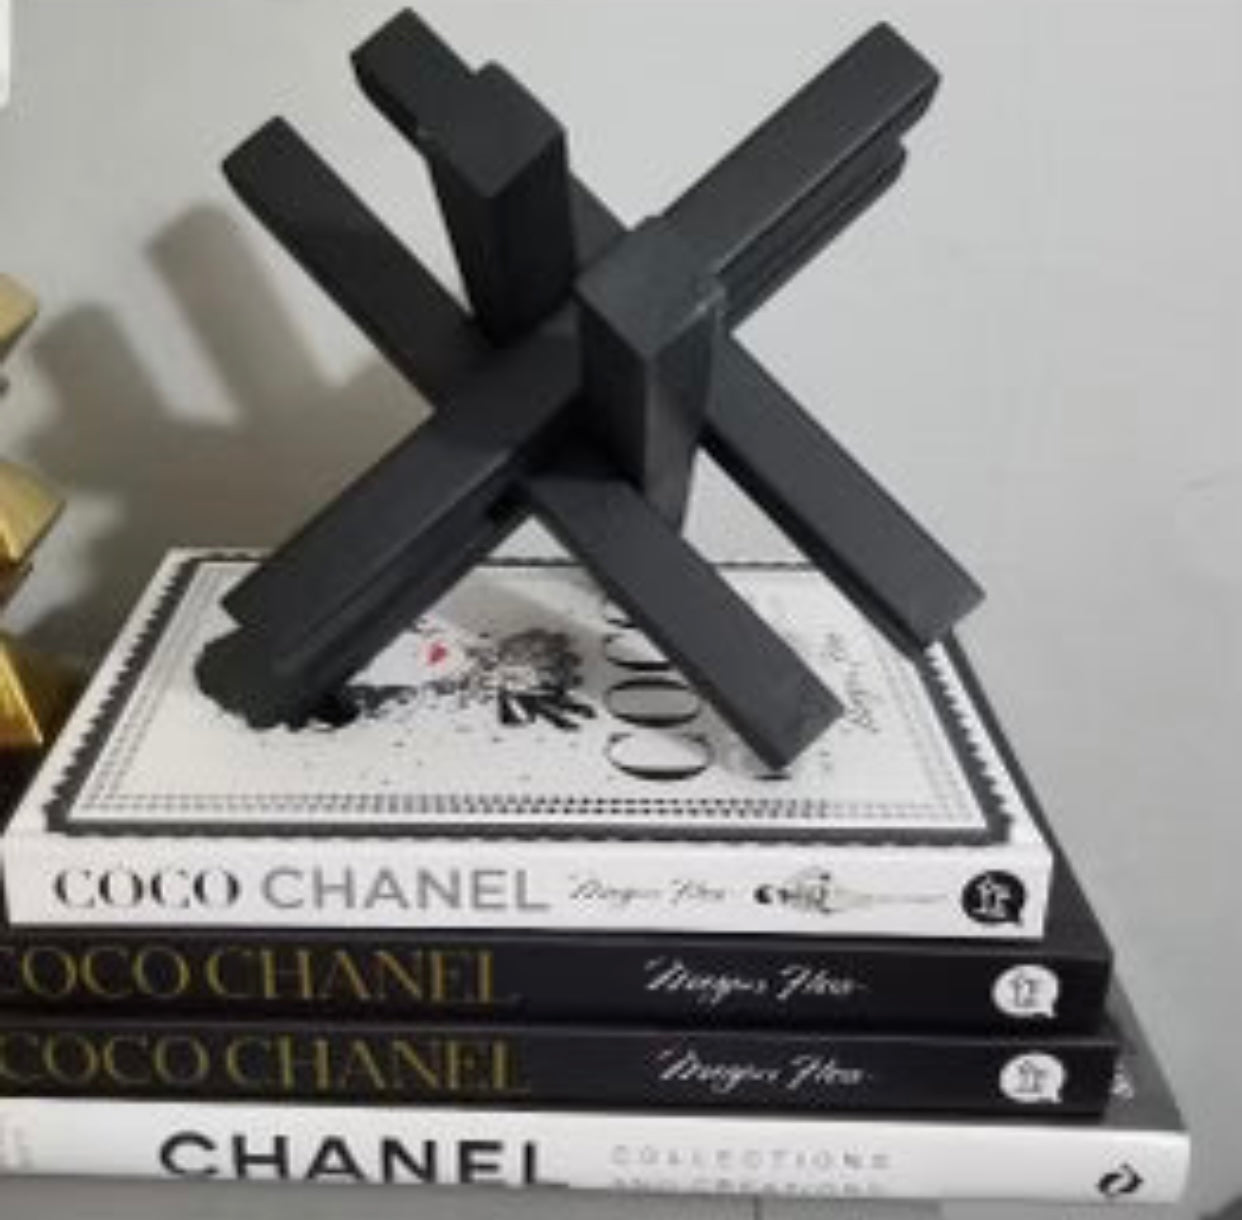 chanel book decor for coffee table